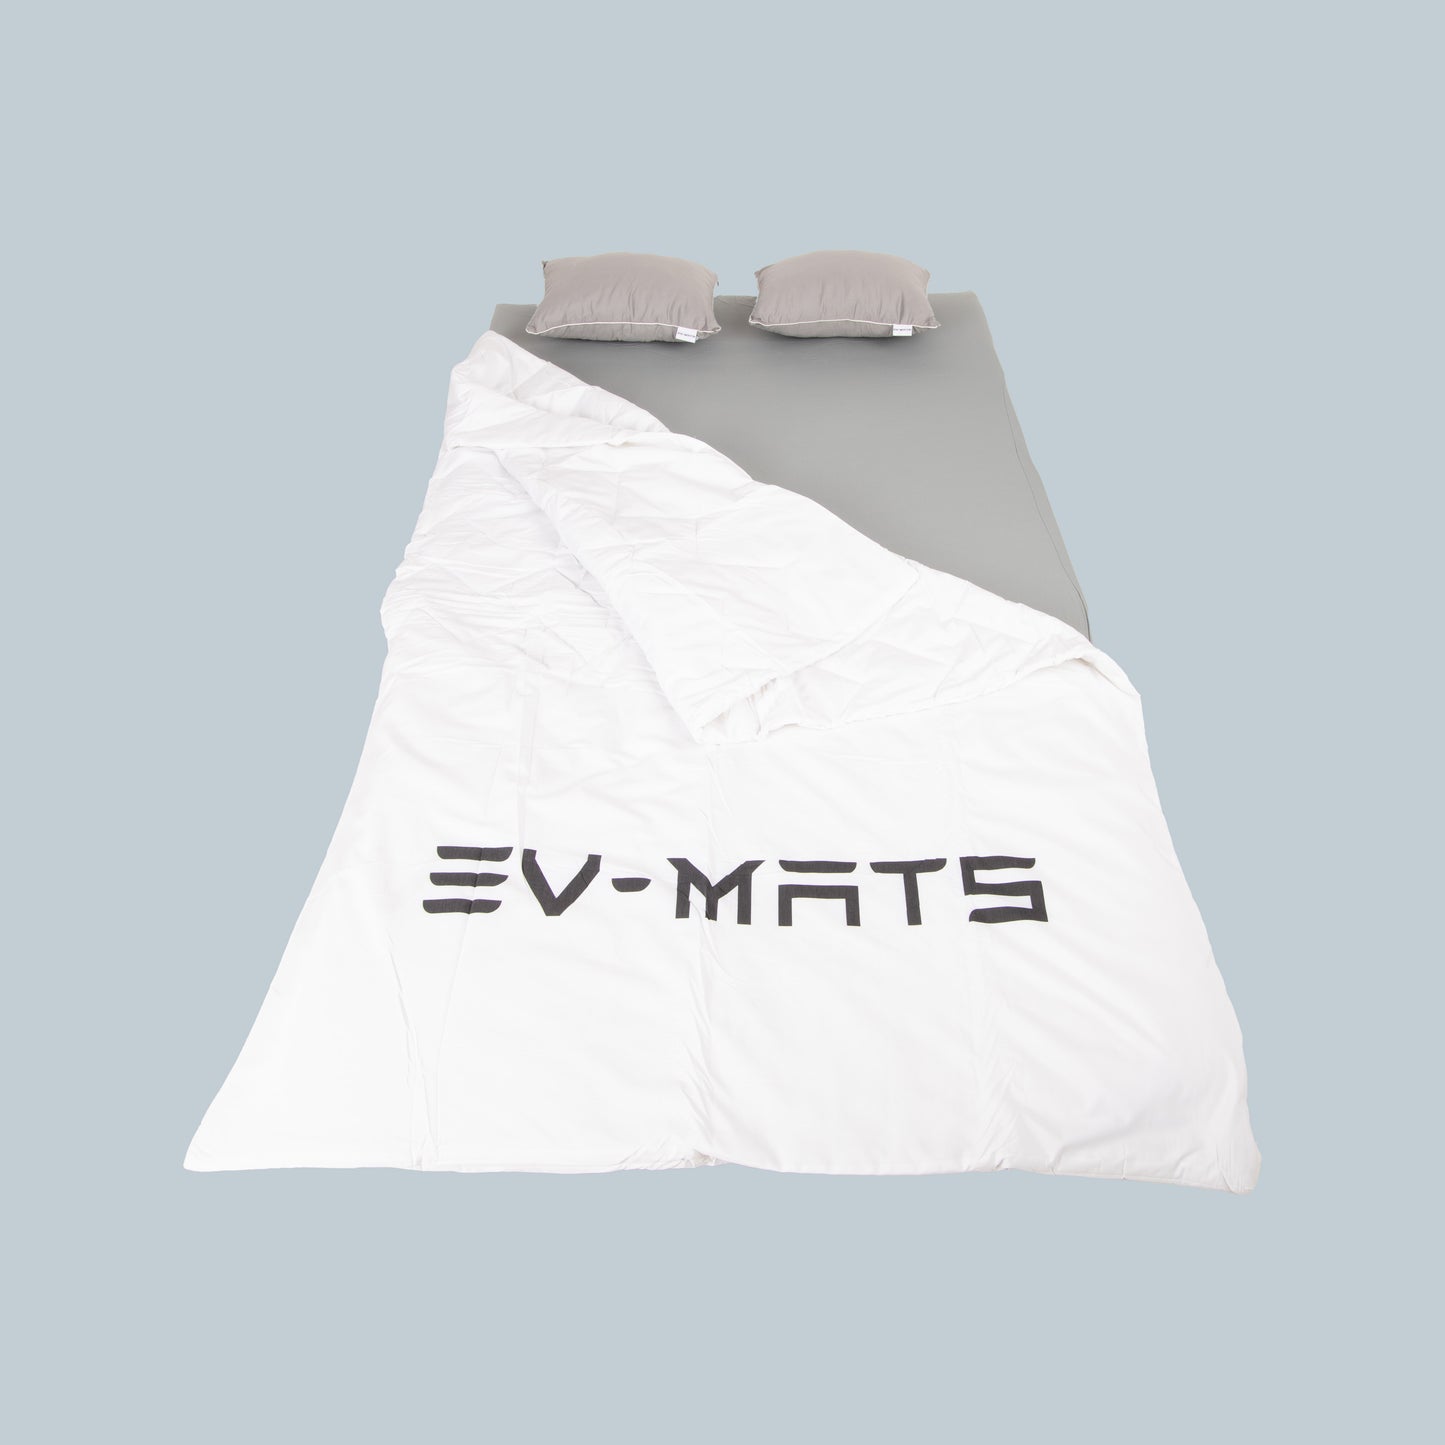 EV-MATS Basic CAMP SET for Tesla Model 3 + Highland includes the Tesla mattress, the waterproof bag that fits in the back trunk of the Tesla Model 3, a sheet, a duvet, 2 pillows and a pillowcase